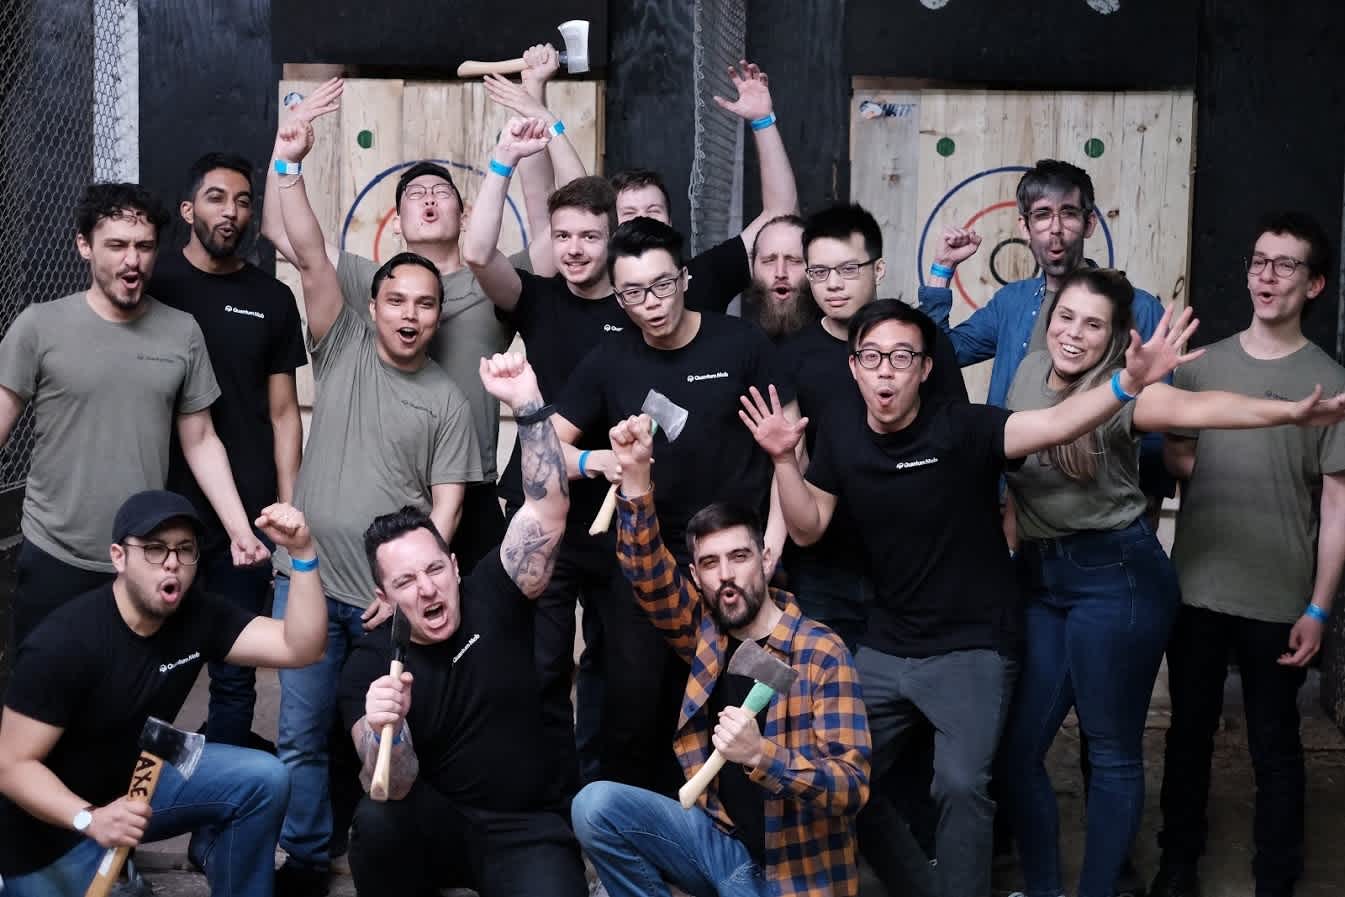 Quantum mob celebrating at axe throwing event